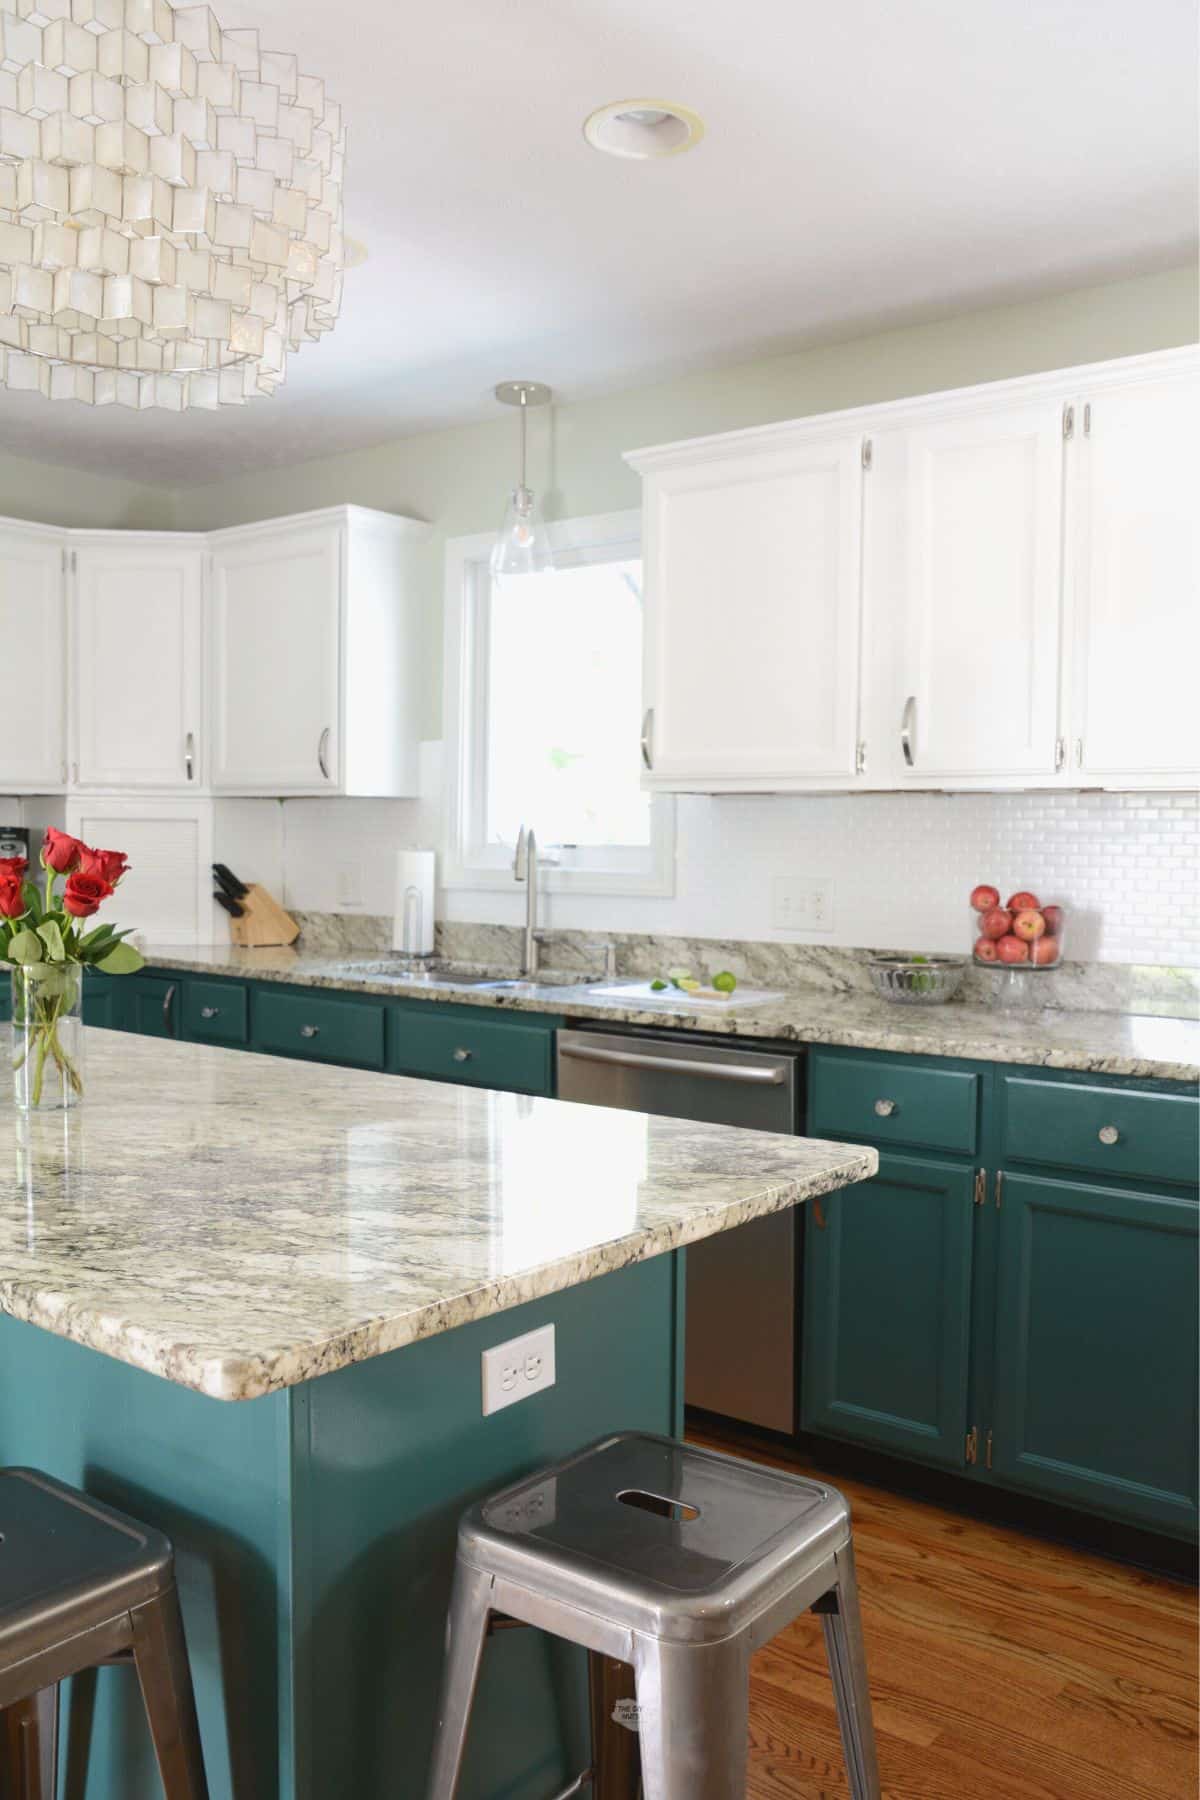 green lower kitchen cabinets with white upper kitchen cabinets.